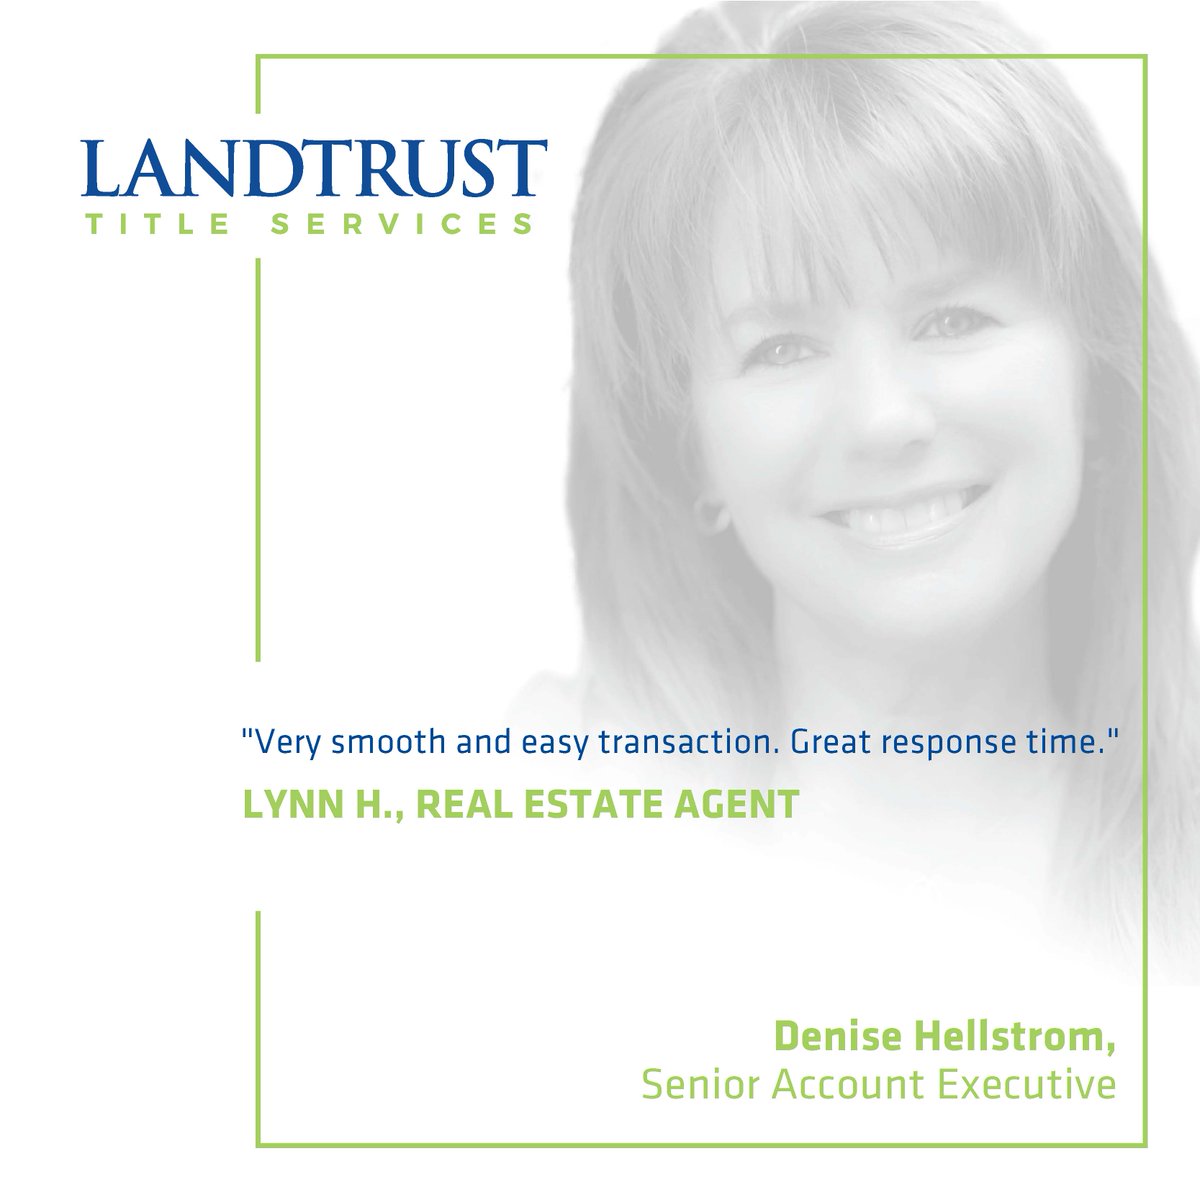 At Landtrust Title Services, it’s all about the relationship. We partner with you to ensure a smooth transaction, regardless of complexity.

#Chicagoland #Wisconsin #Chicagorealestate #Wisconsinrealestate #realestate #partners #attorneys #brokers #buyers #sellers #CRE